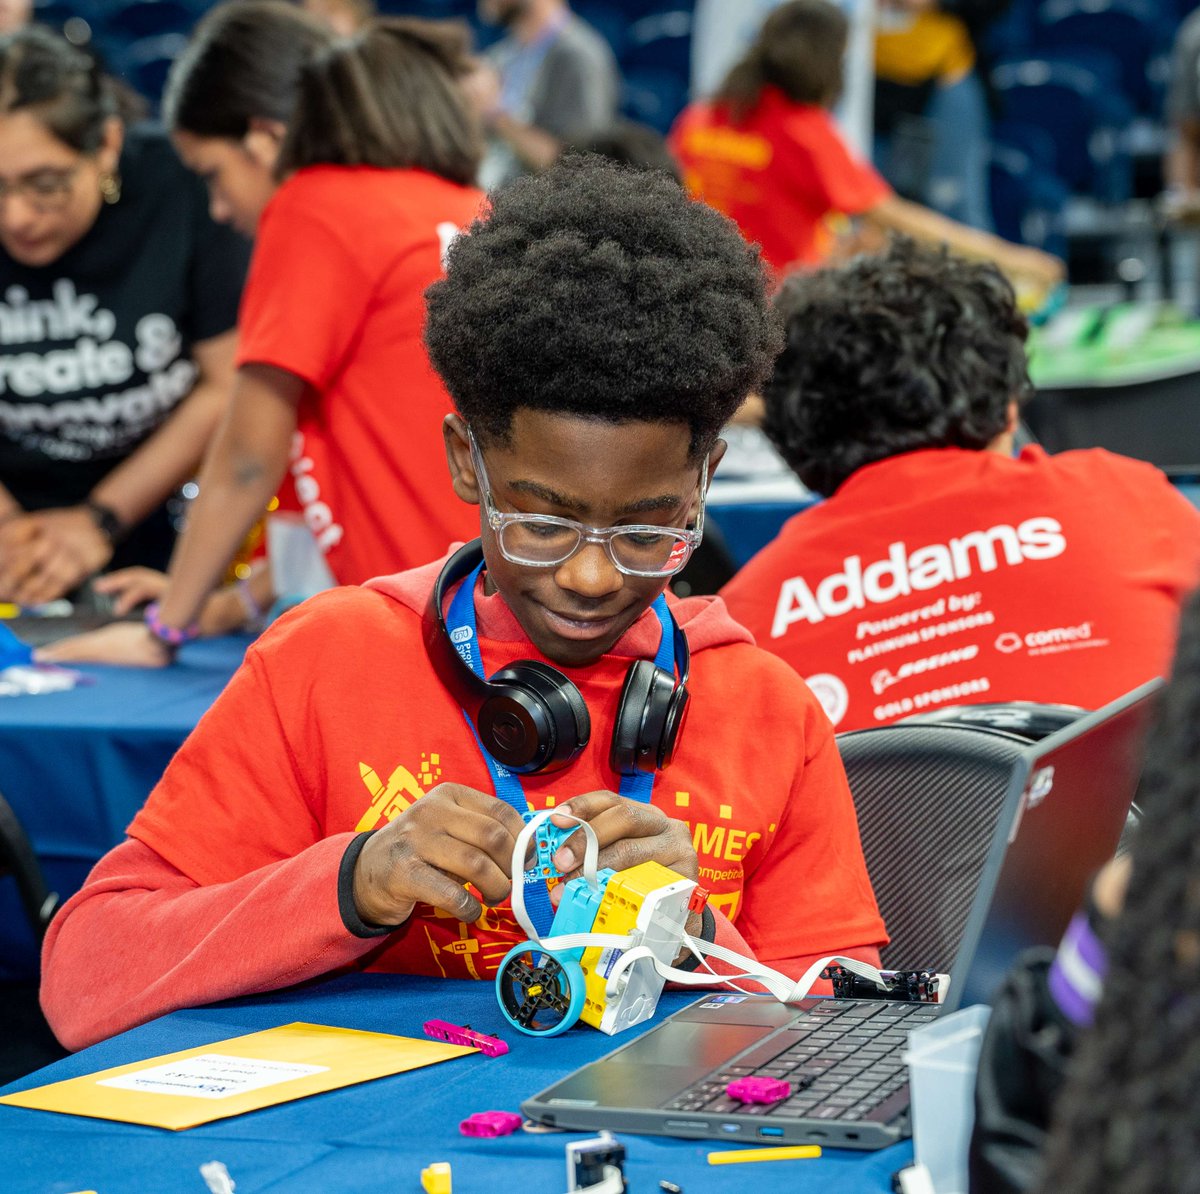 Get a closer look at our students in action during the 7th Annual ENpowered Games! 📸

#EPG24 #ENpoweredGames #ProjectSYNCERE #STEM #Engineering #STEMeducation #Chicago